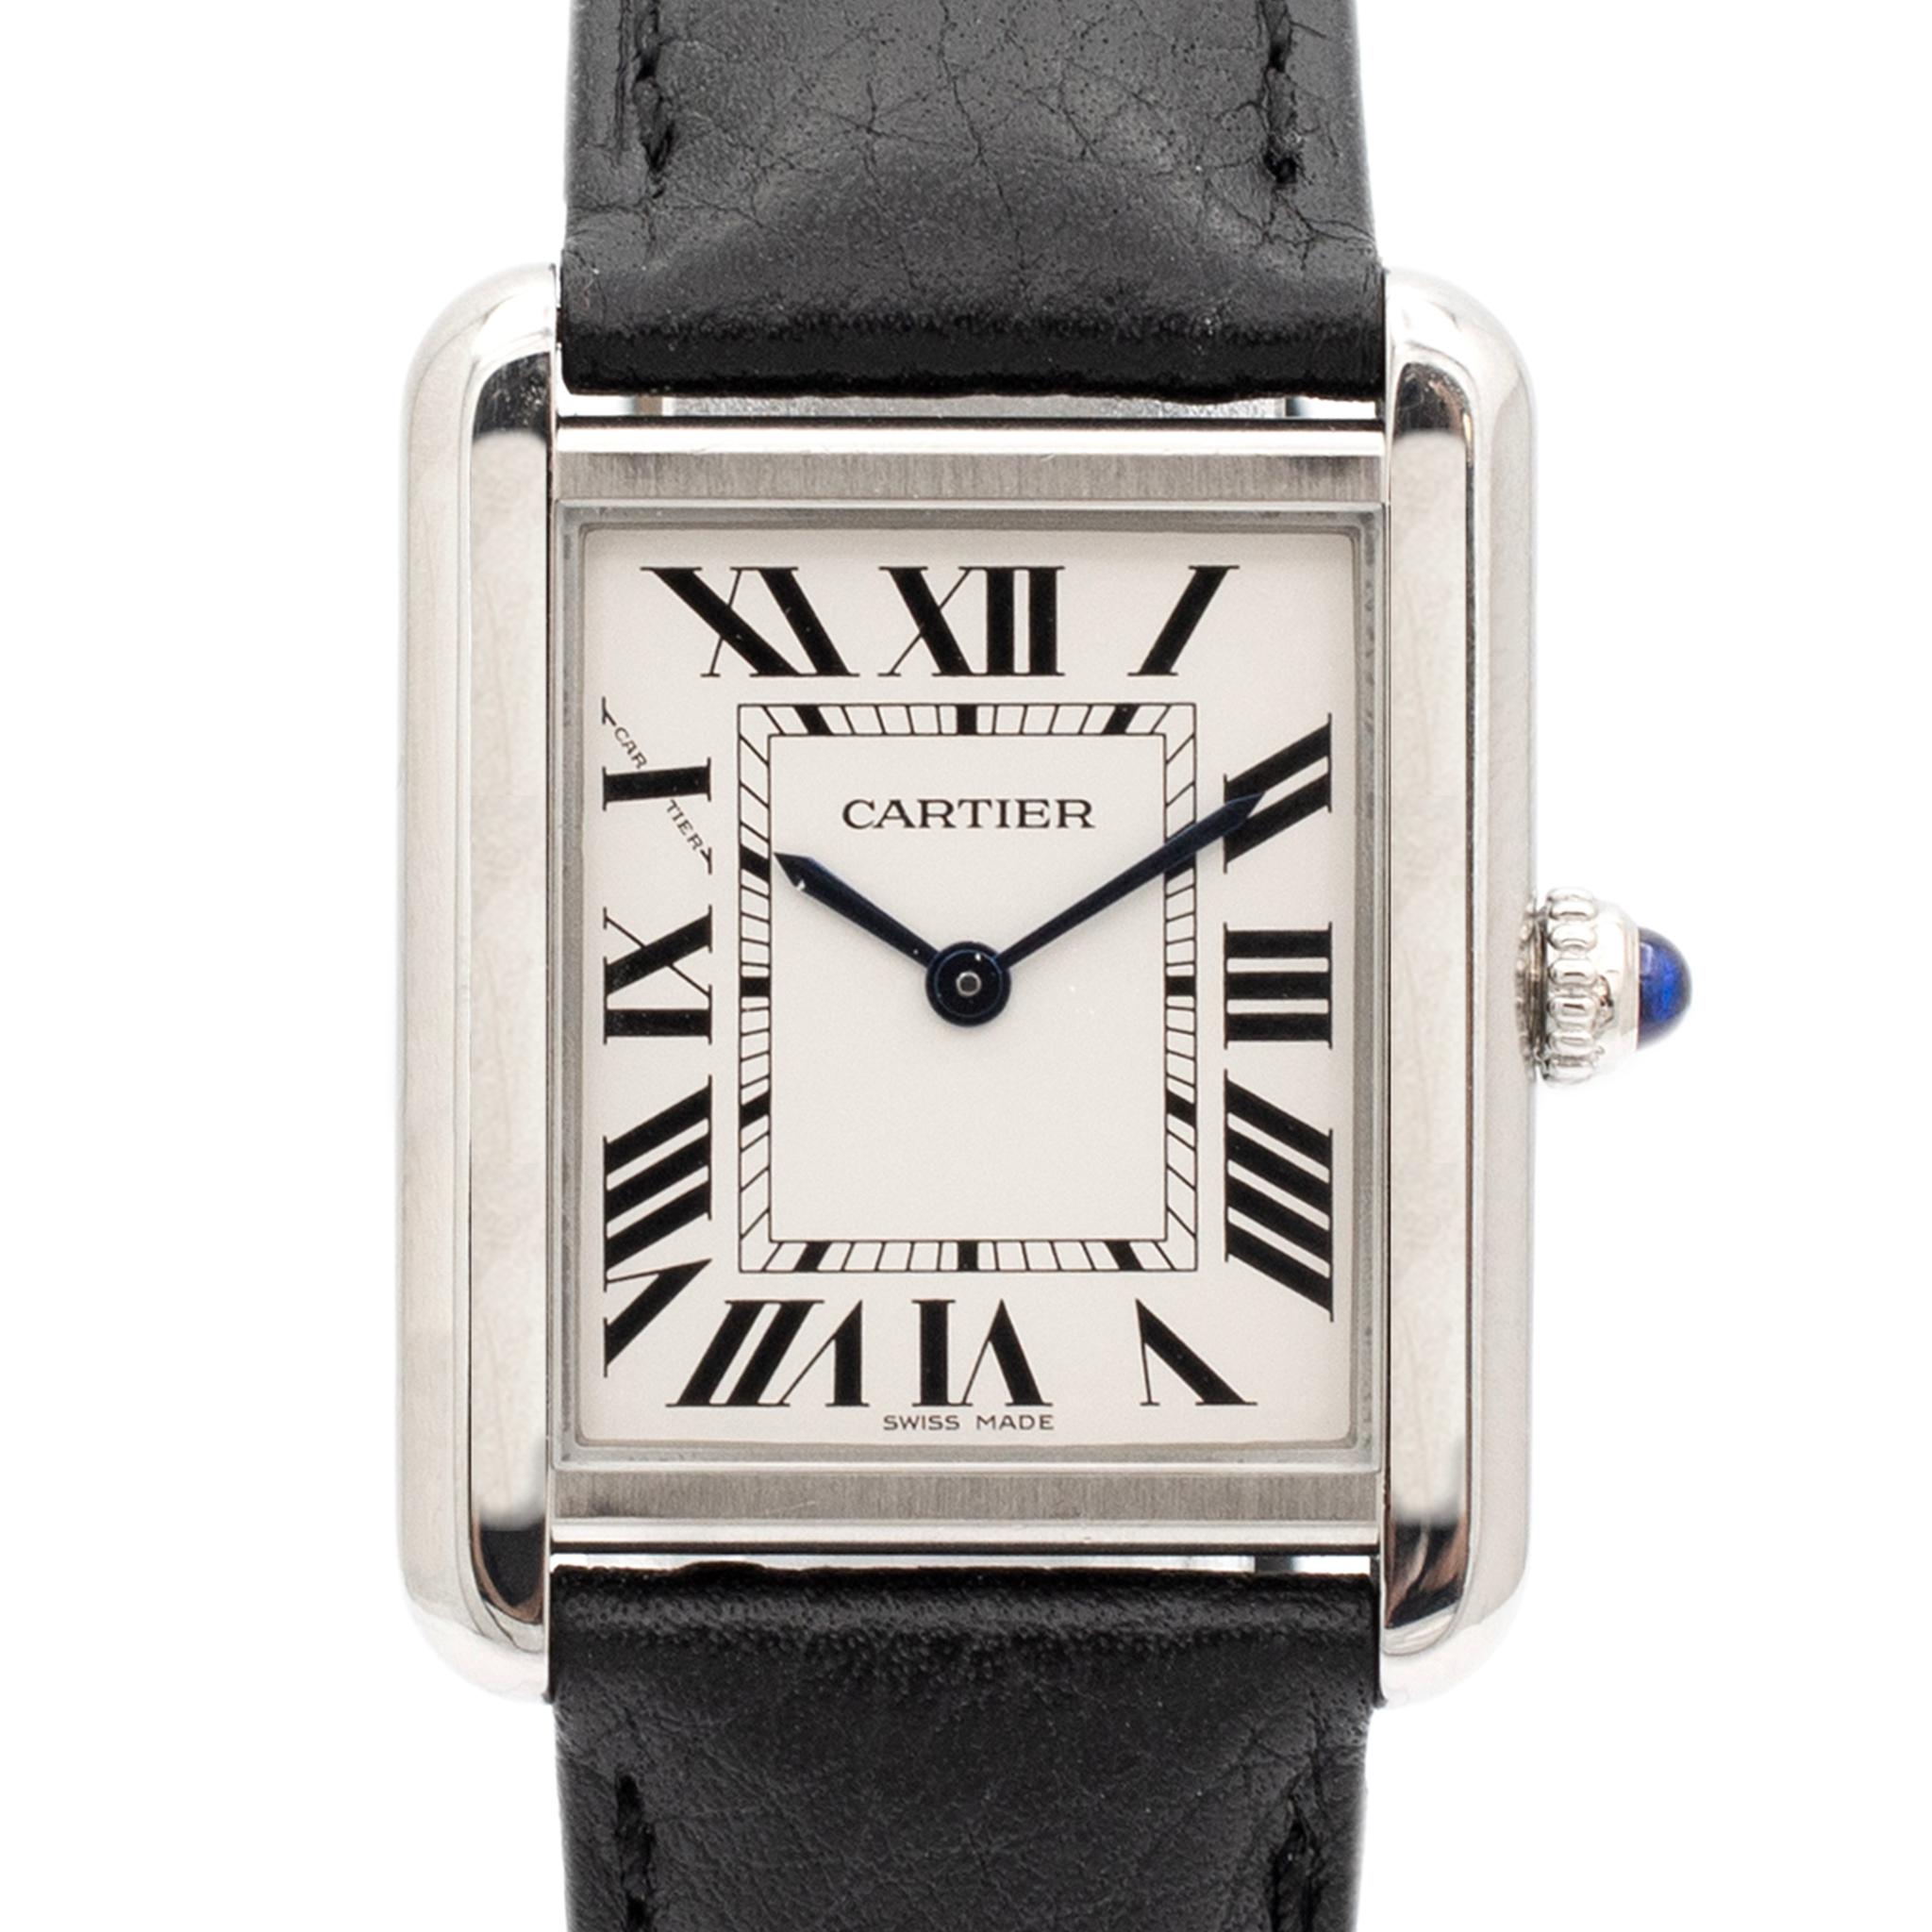 Brand: Cartier

Gender: Ladies

Metal Type: Stainless Steel

Weight: 30.78 grams

Ladies stainless steel Cartier Swiss made watch with original box. Engraved with 